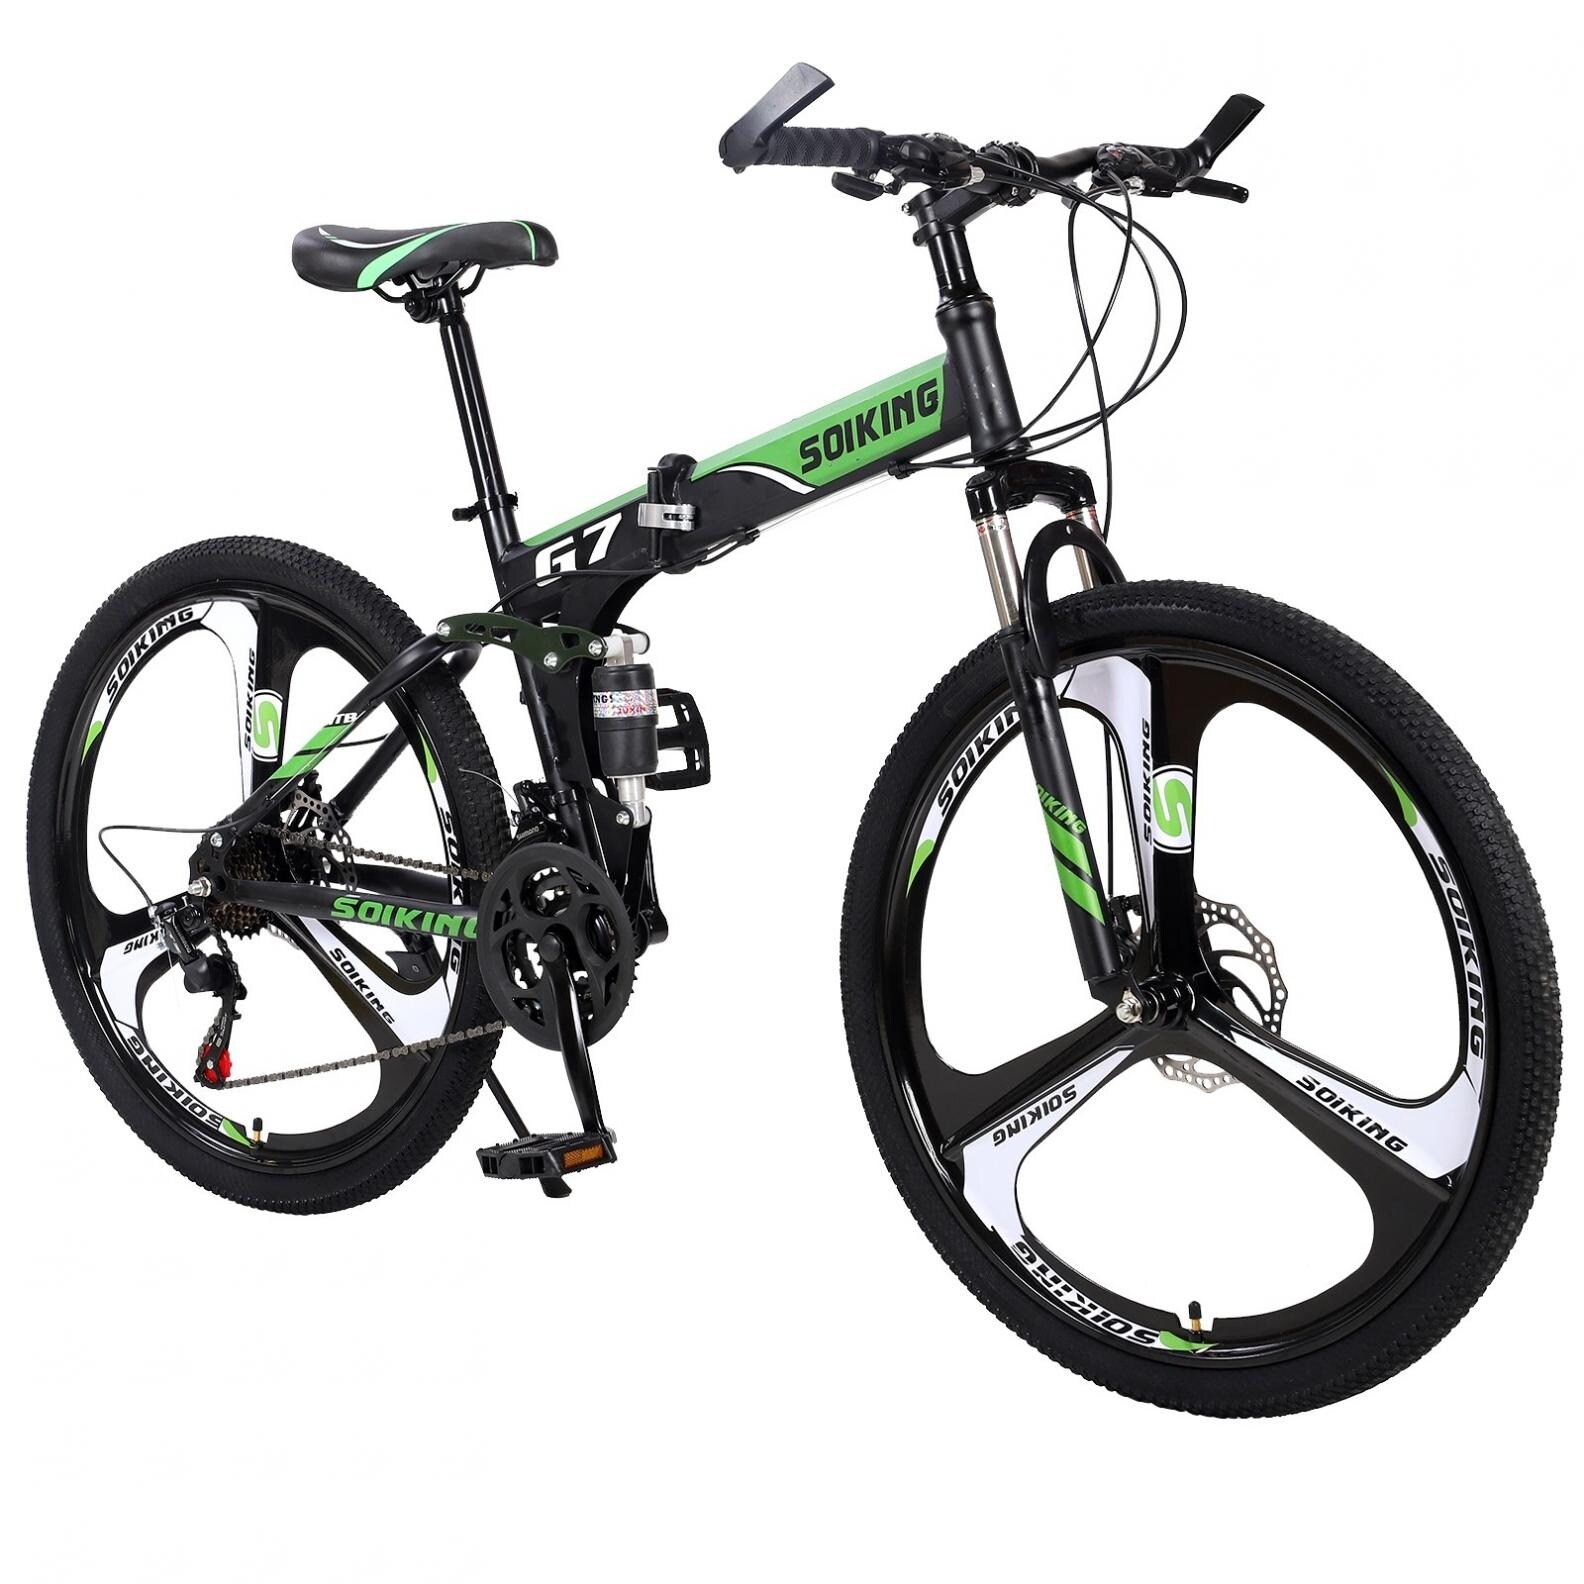 Gecau Folding Mountain Bike 20 Inch Variable Speed Bicycle 21 Speed 5 Spoke Double Disc Brake Bicycle Gear Steel Frame Adult Travel Folding Bicycle US Fast Shipment 